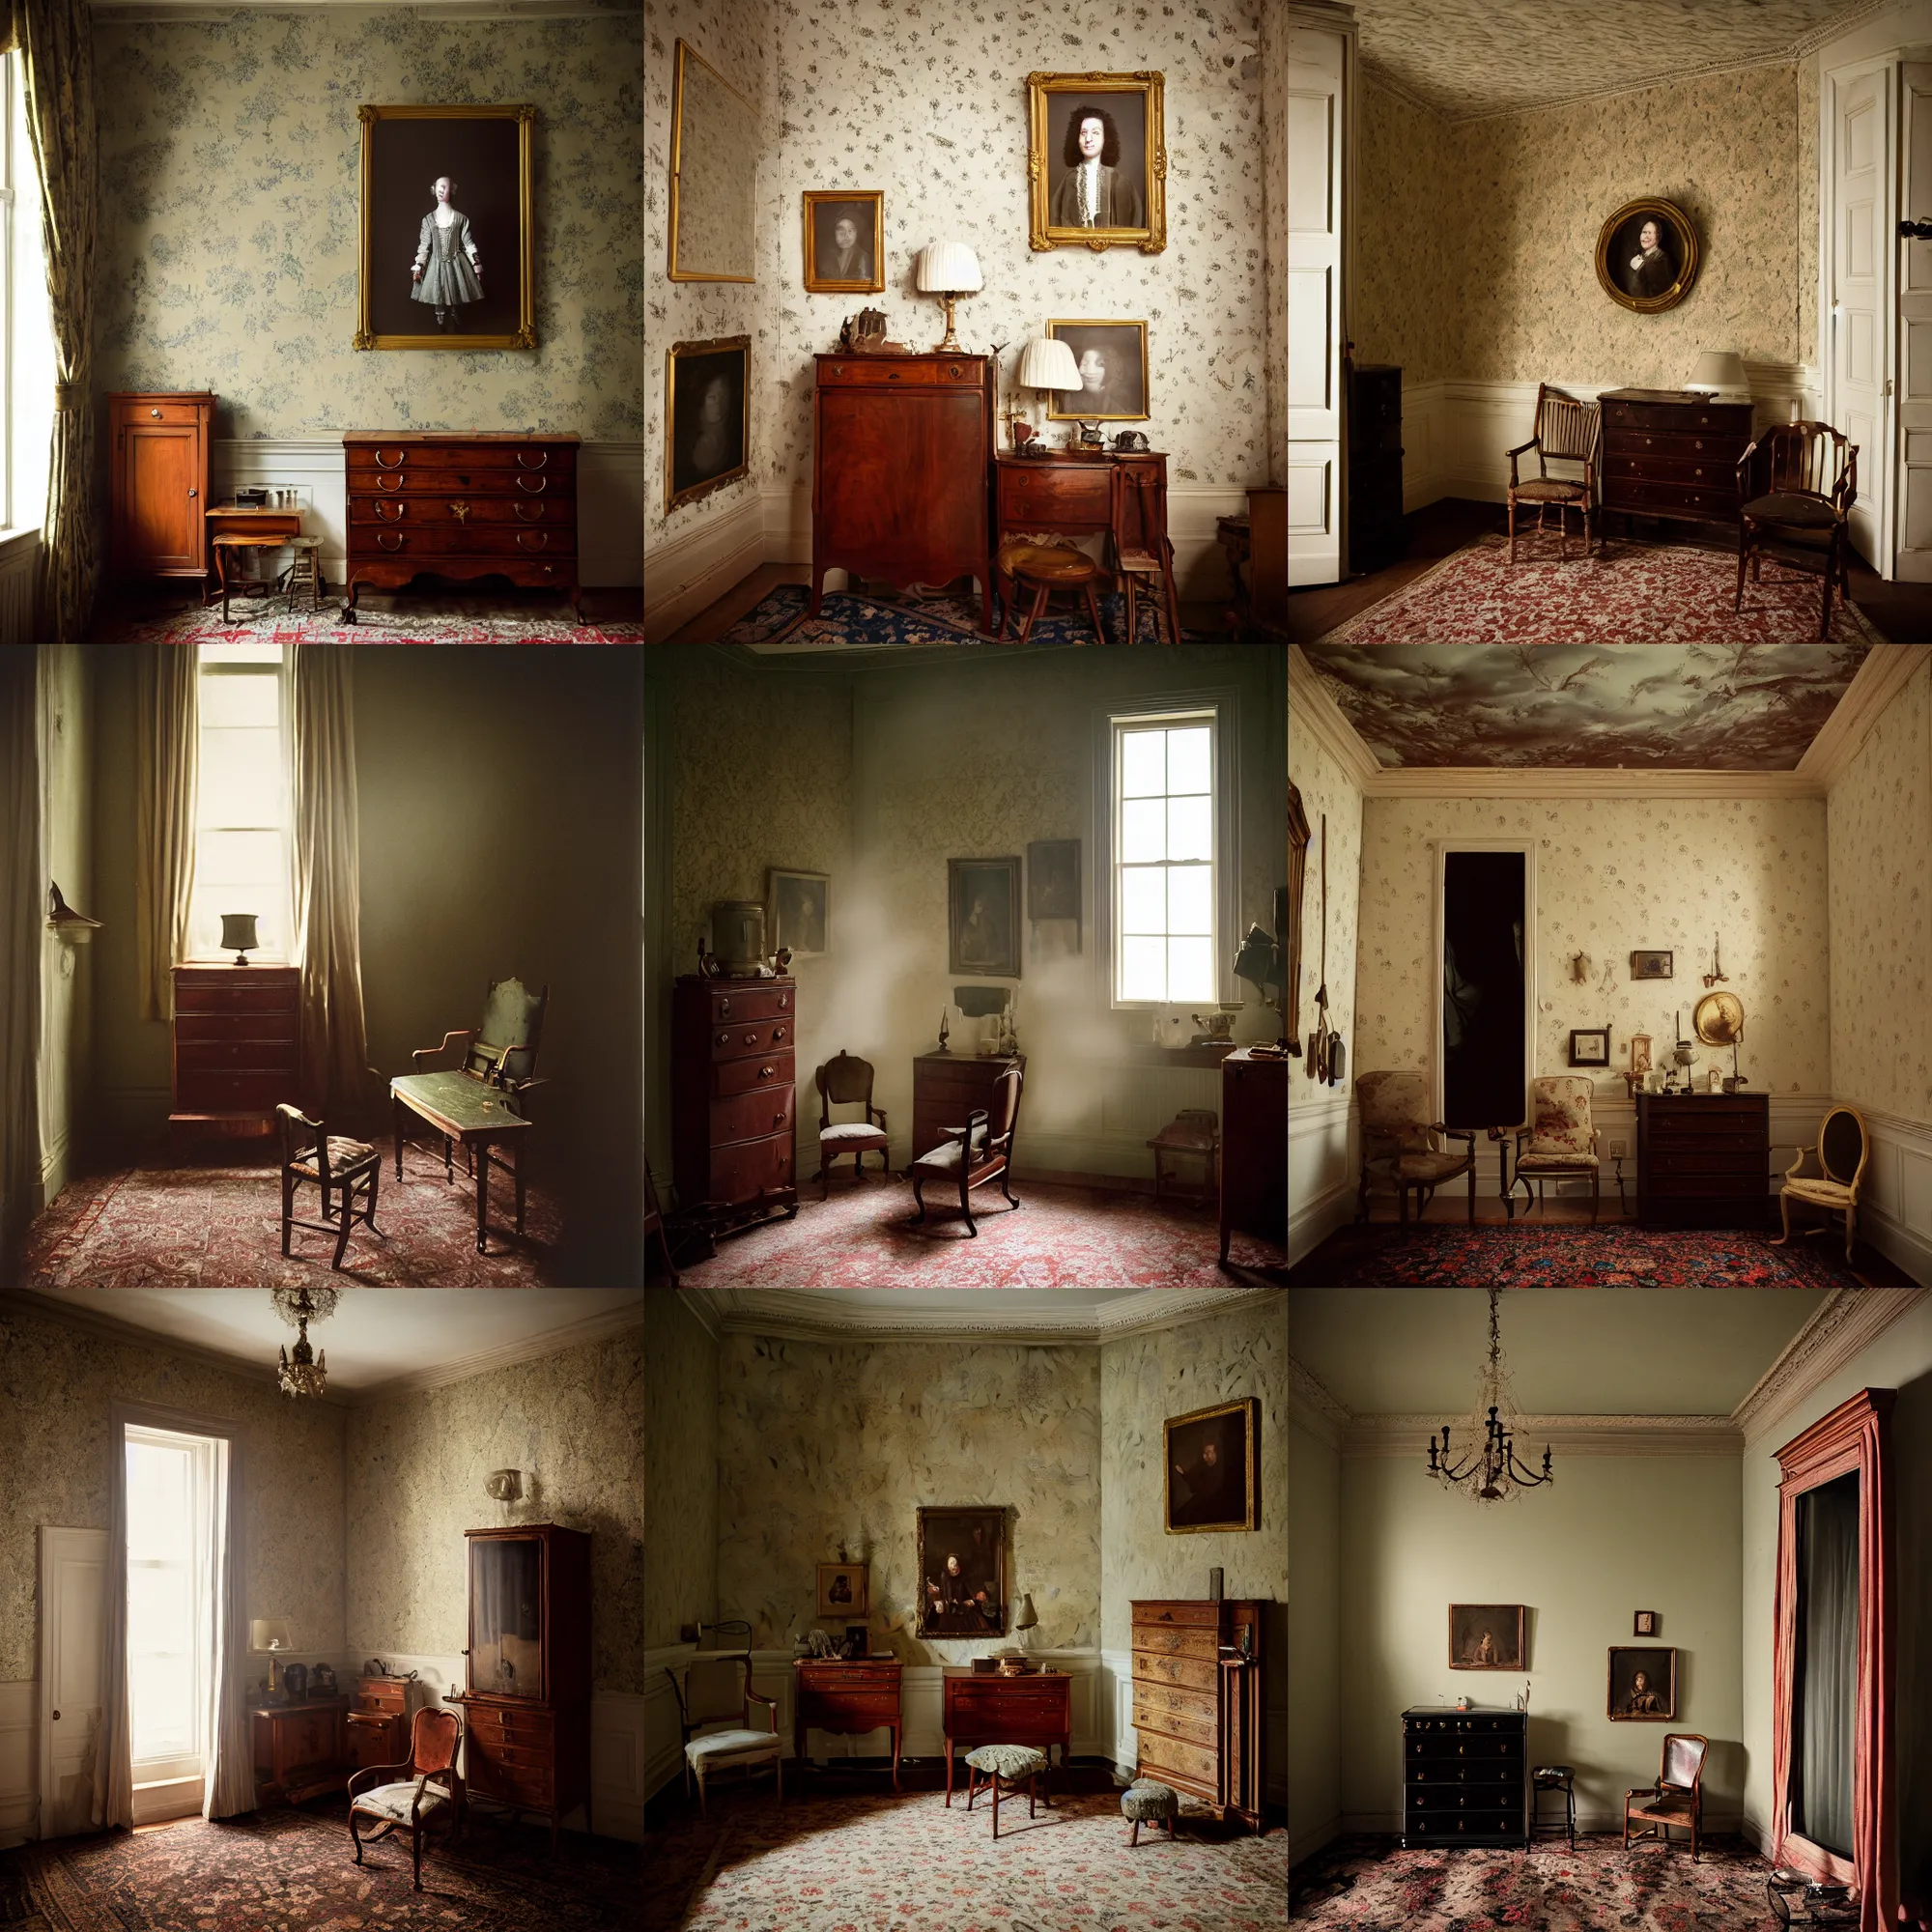 Prompt: kodak portra 4 0 0, wetplate, 8 mm extreme fisheye, award - winning portrait by britt marling of a 1 7 5 0 s room, the walking dead, picture frames, shining lamps, dust, smoke 1 7 5 0 s furniture, wallpaper, carpet, interior, muted colours, fog